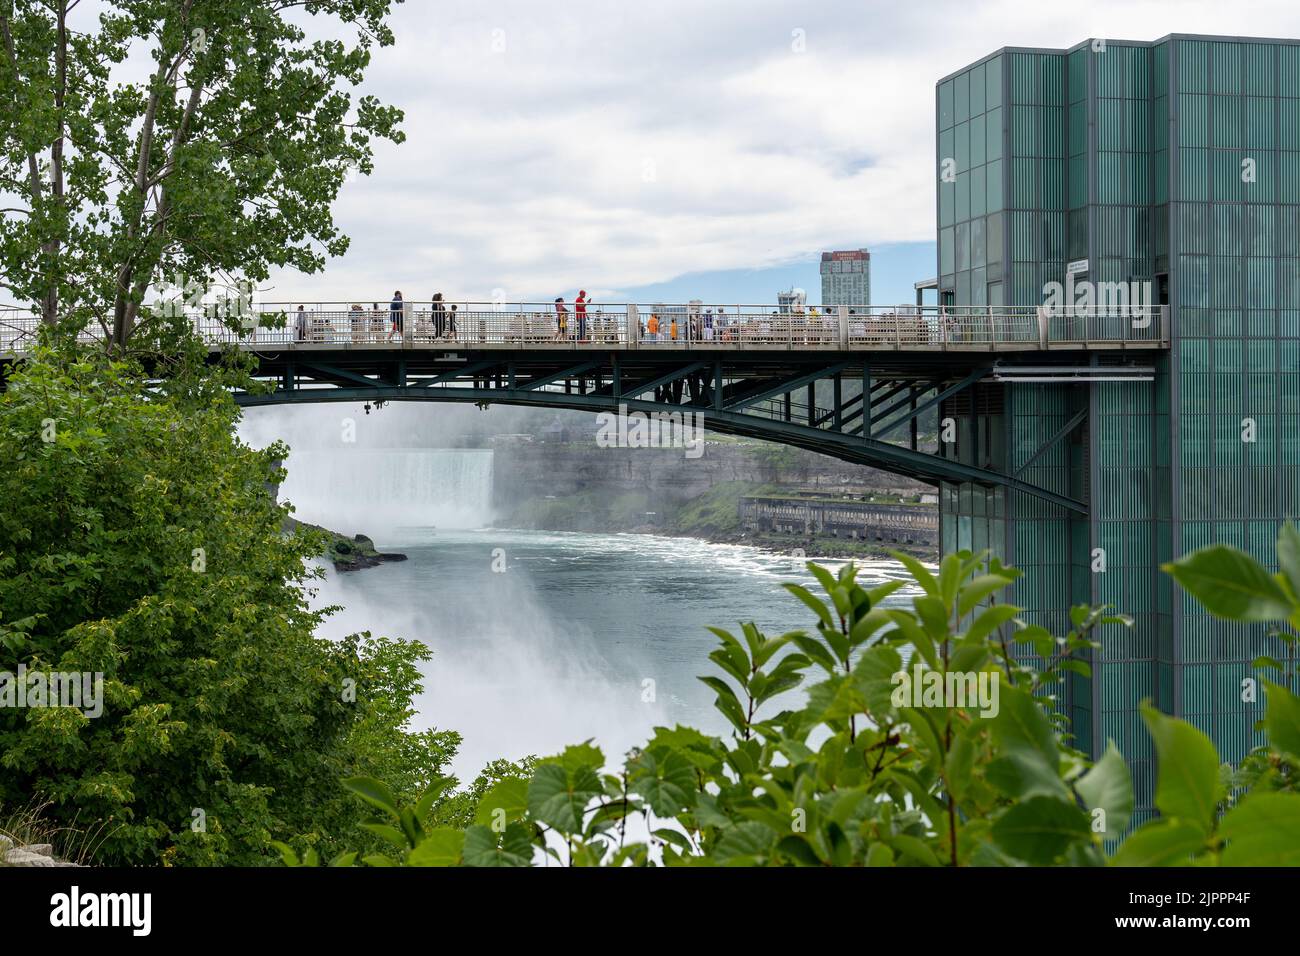 Niagara Falls, NY - July 31, 2022: View of Niagara Falls shrowded in mist, framed by the bridge leading to the observation deck and trees. Stock Photo